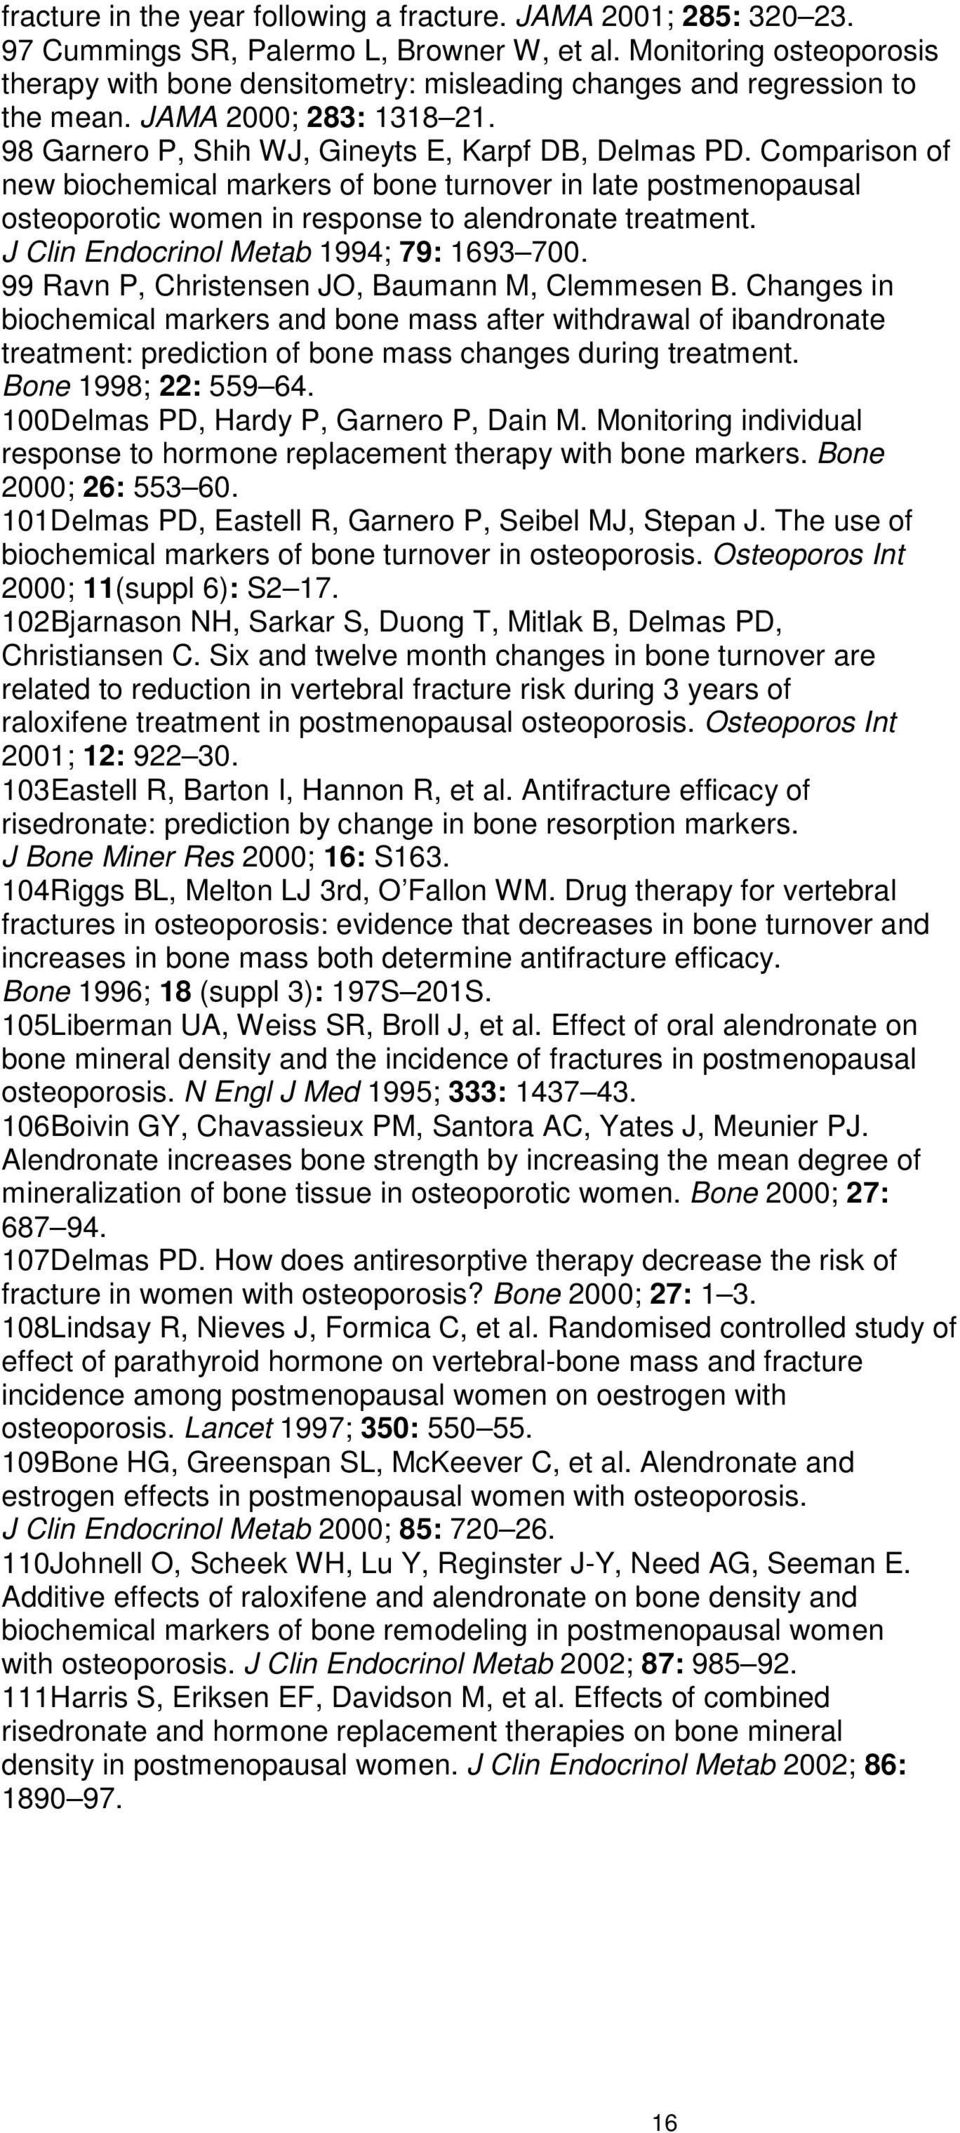 Comparison of new biochemical markers of bone turnover in late postmenopausal osteoporotic women in response to alendronate treatment. J Clin Endocrinol Metab 1994; 79: 1693 700.